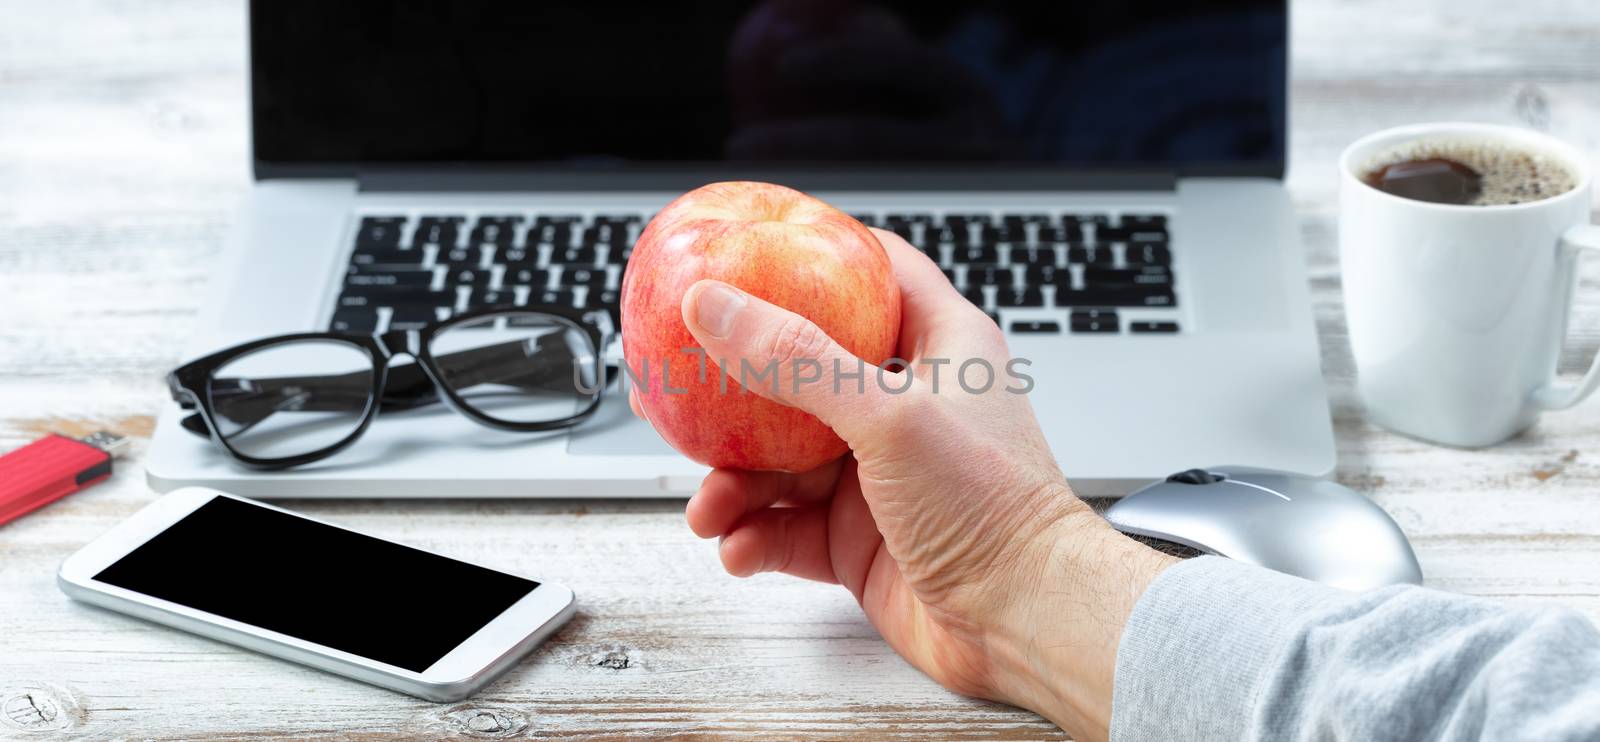 Male hand holding apple fruit with workstation technology in bac by tab1962